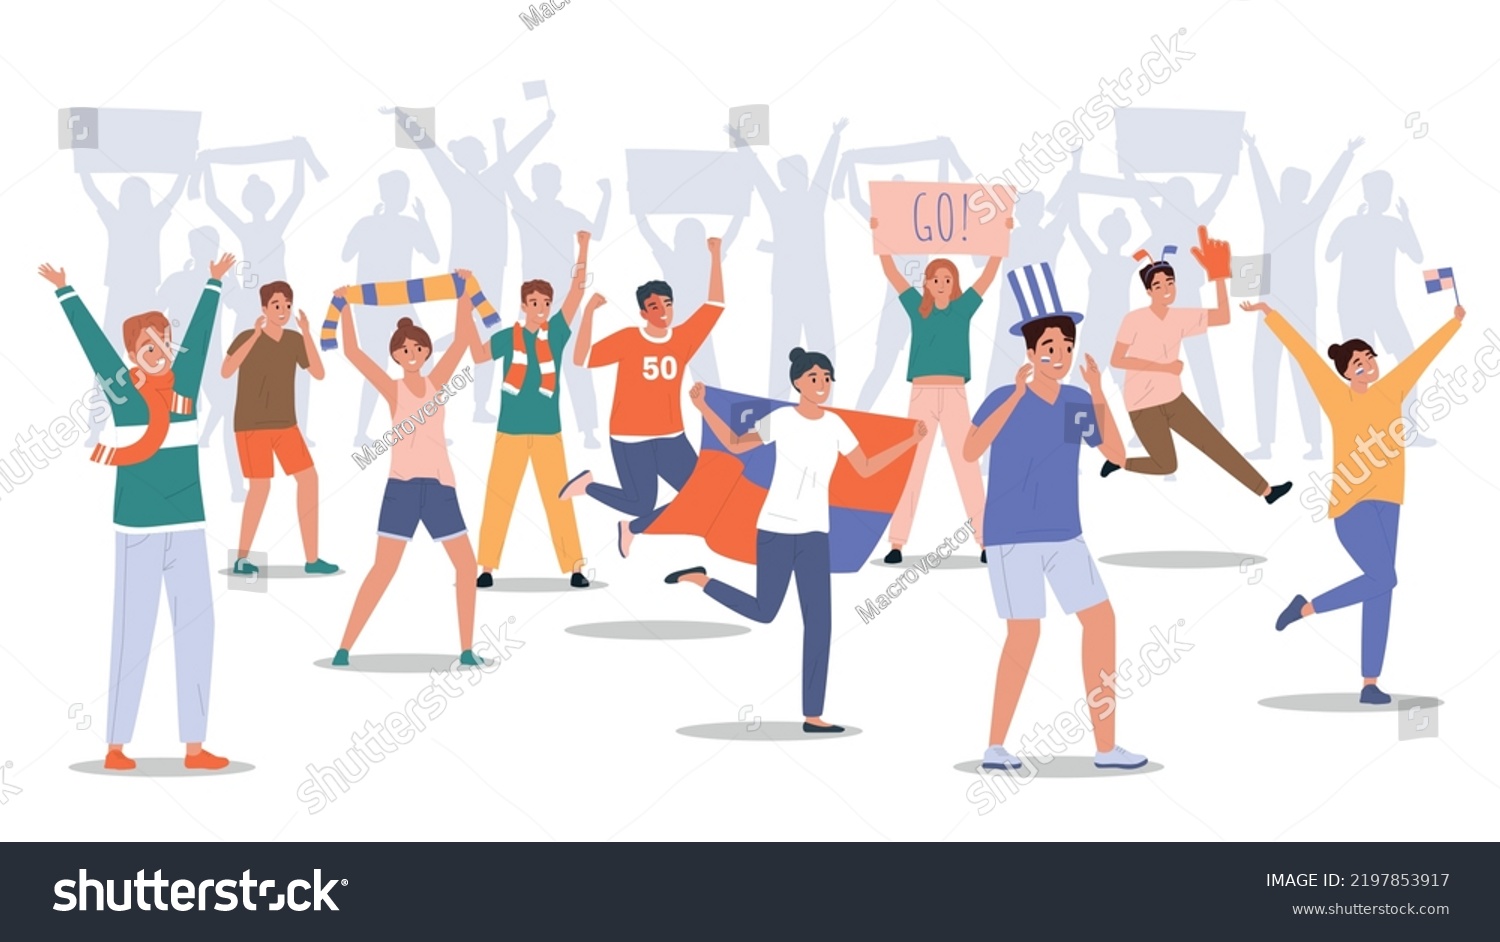 Crowd of cheering sport fans with flags posters scarves with people silhouettes in background flat composition vector illustration #2197853917